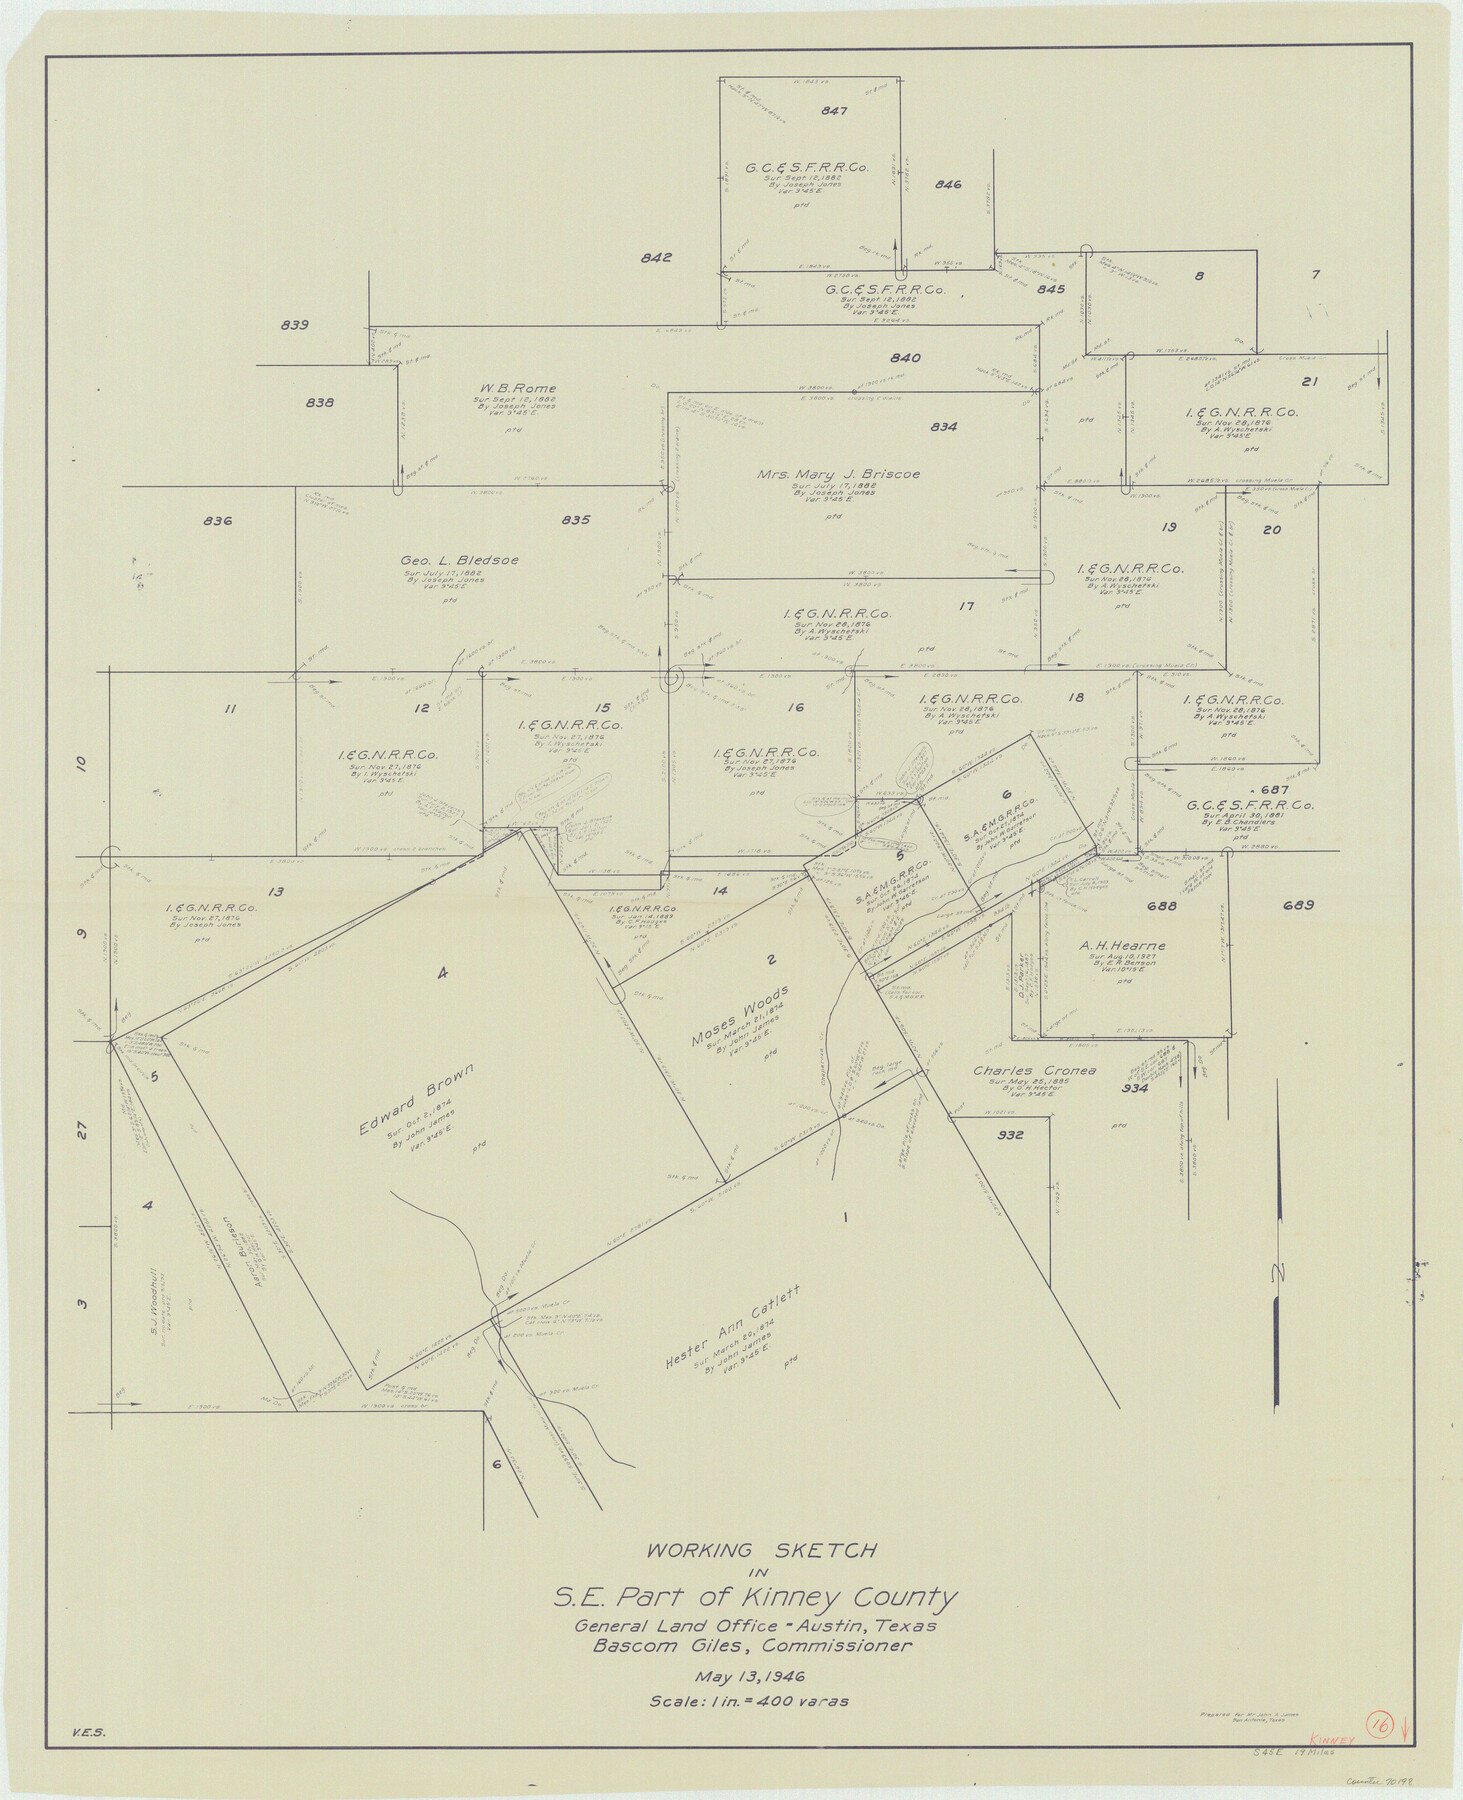 70198, Kinney County Working Sketch 16, General Map Collection